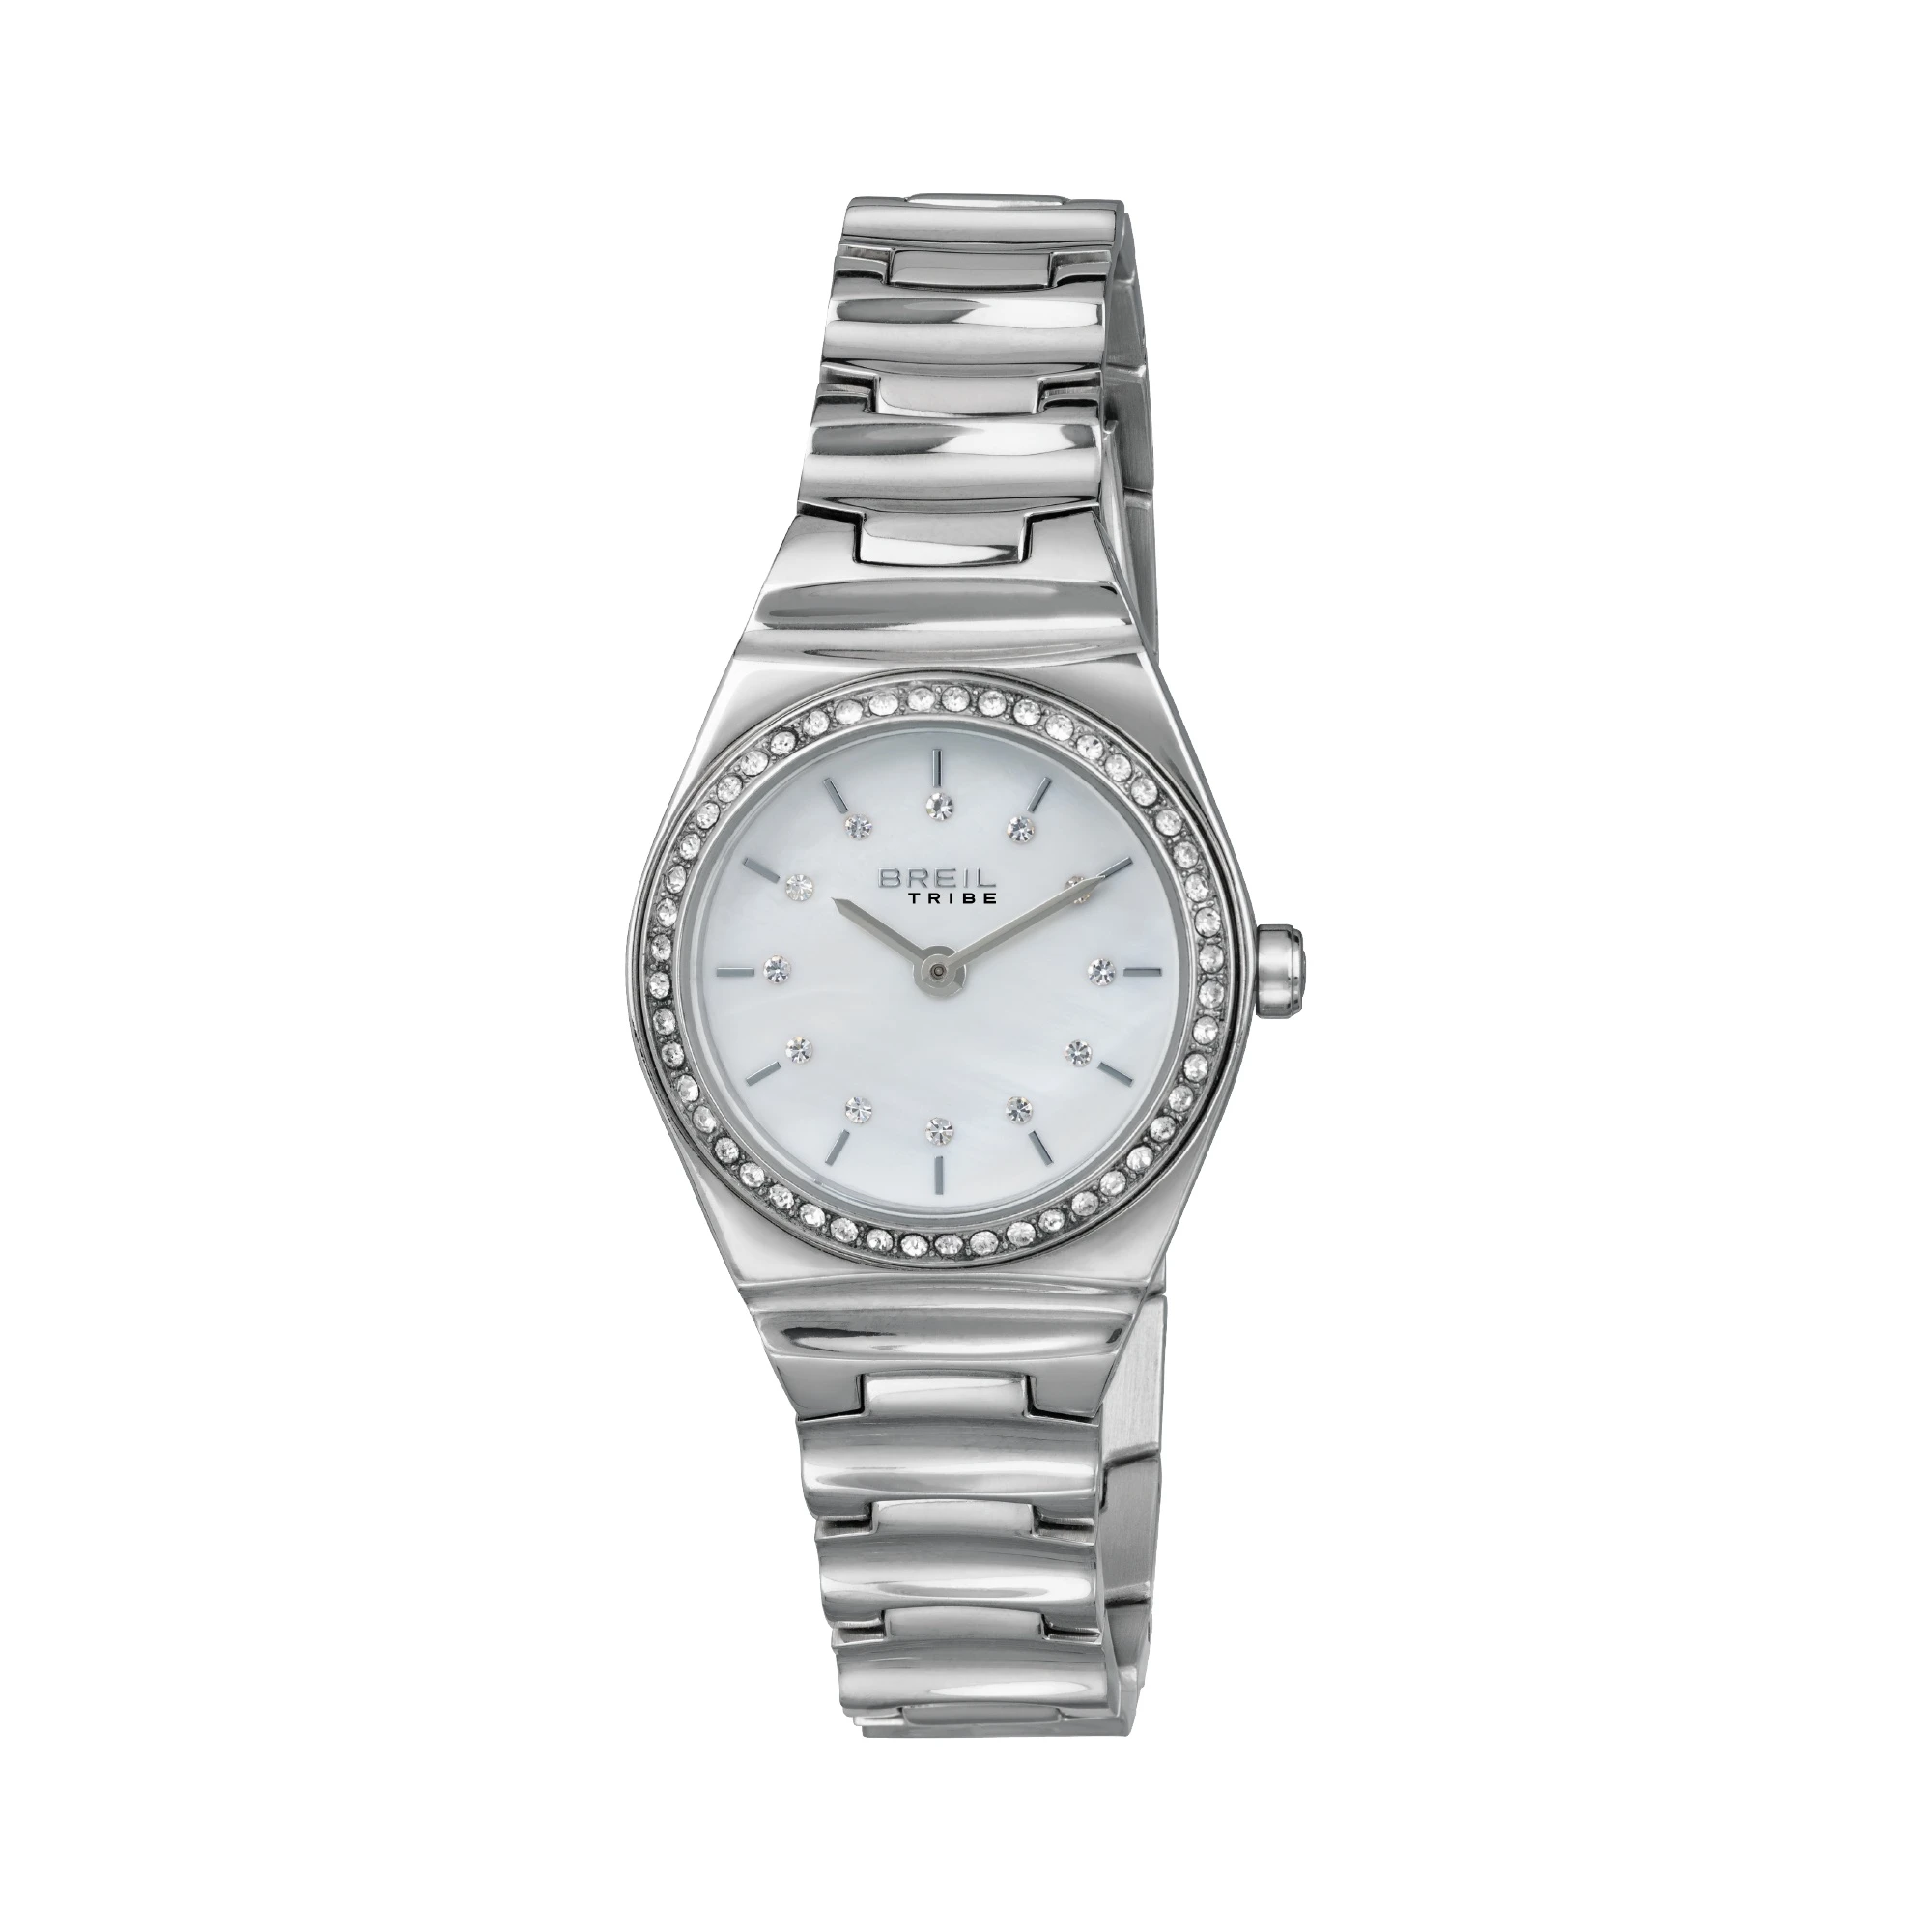 WAVES - LADY 30 MM TIME ONLY CLOCK - 1 - EW0453 | Breil